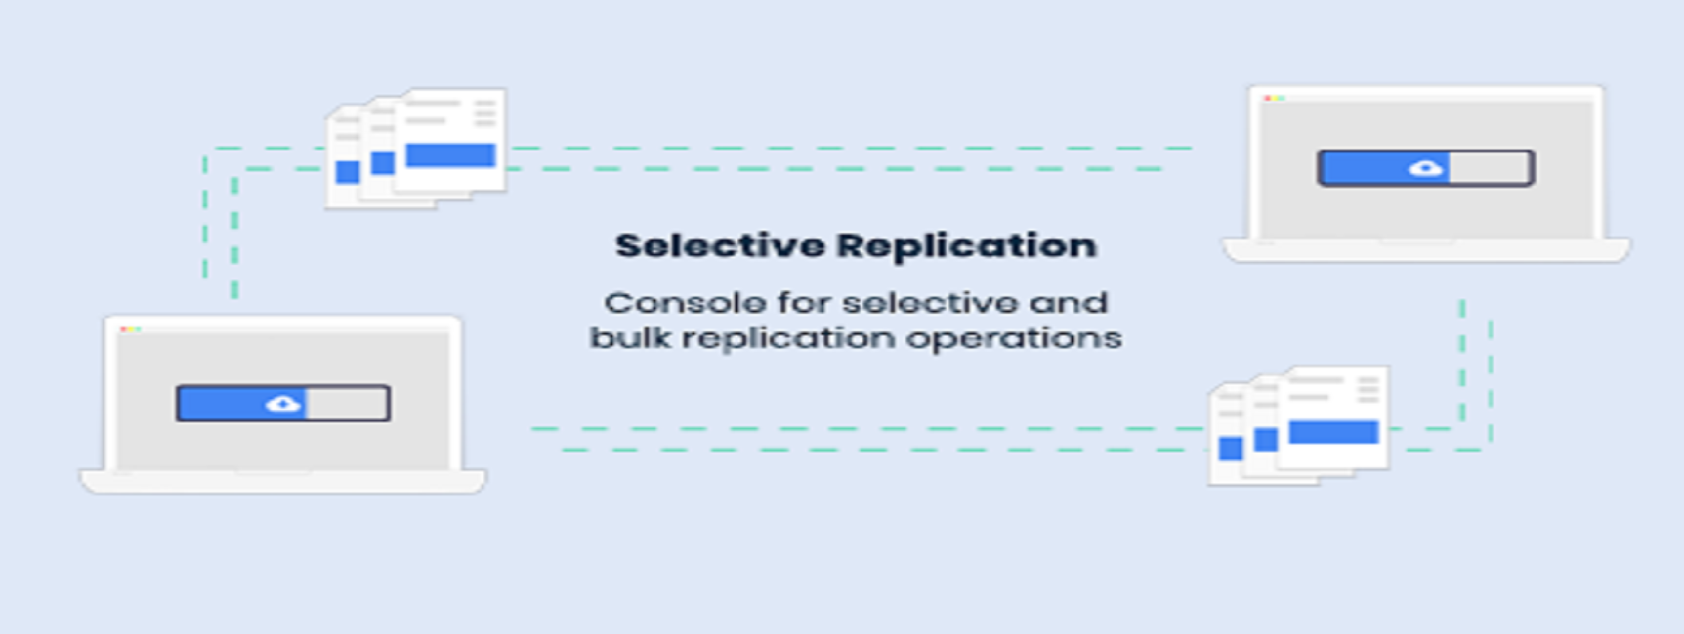 Selective Replication: Bulk content replication made easier with the use of ADX Tools extension in AEM